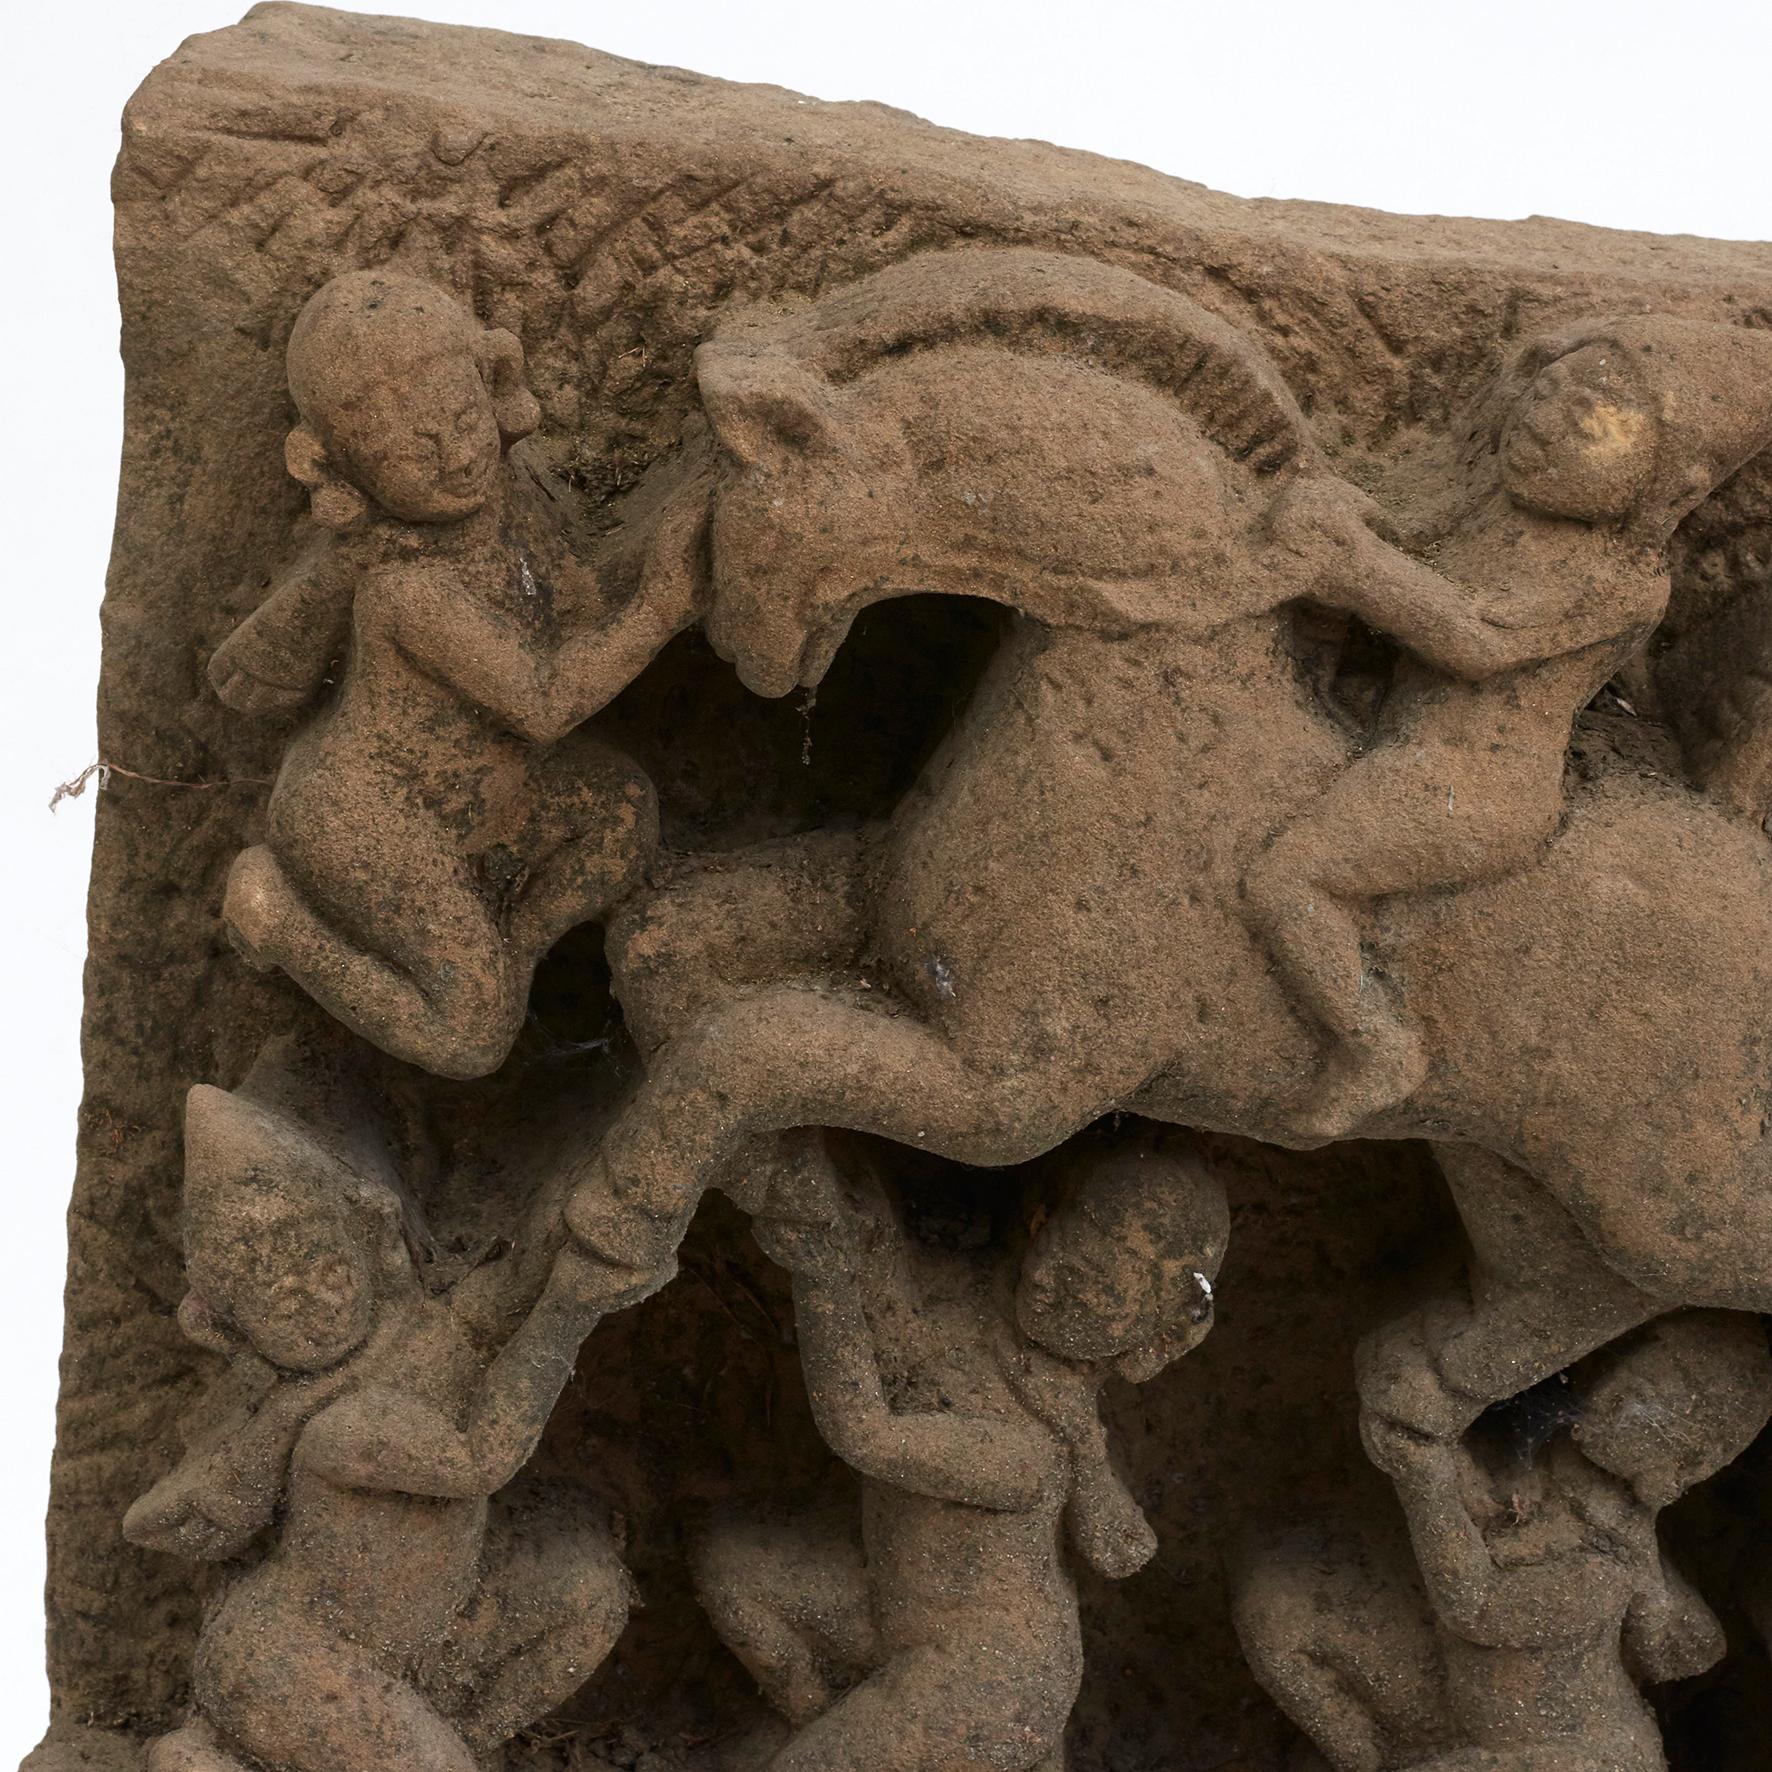 15-16th century sandstone sculpture depicting Prince Siddhartha's (Buddha) horse, 'Kanthaka', during The Great Renunciation. Indra leads the horse, four yakshas bear his feet, Channa holds firmly by the tail.

The Great Renunciation or Great